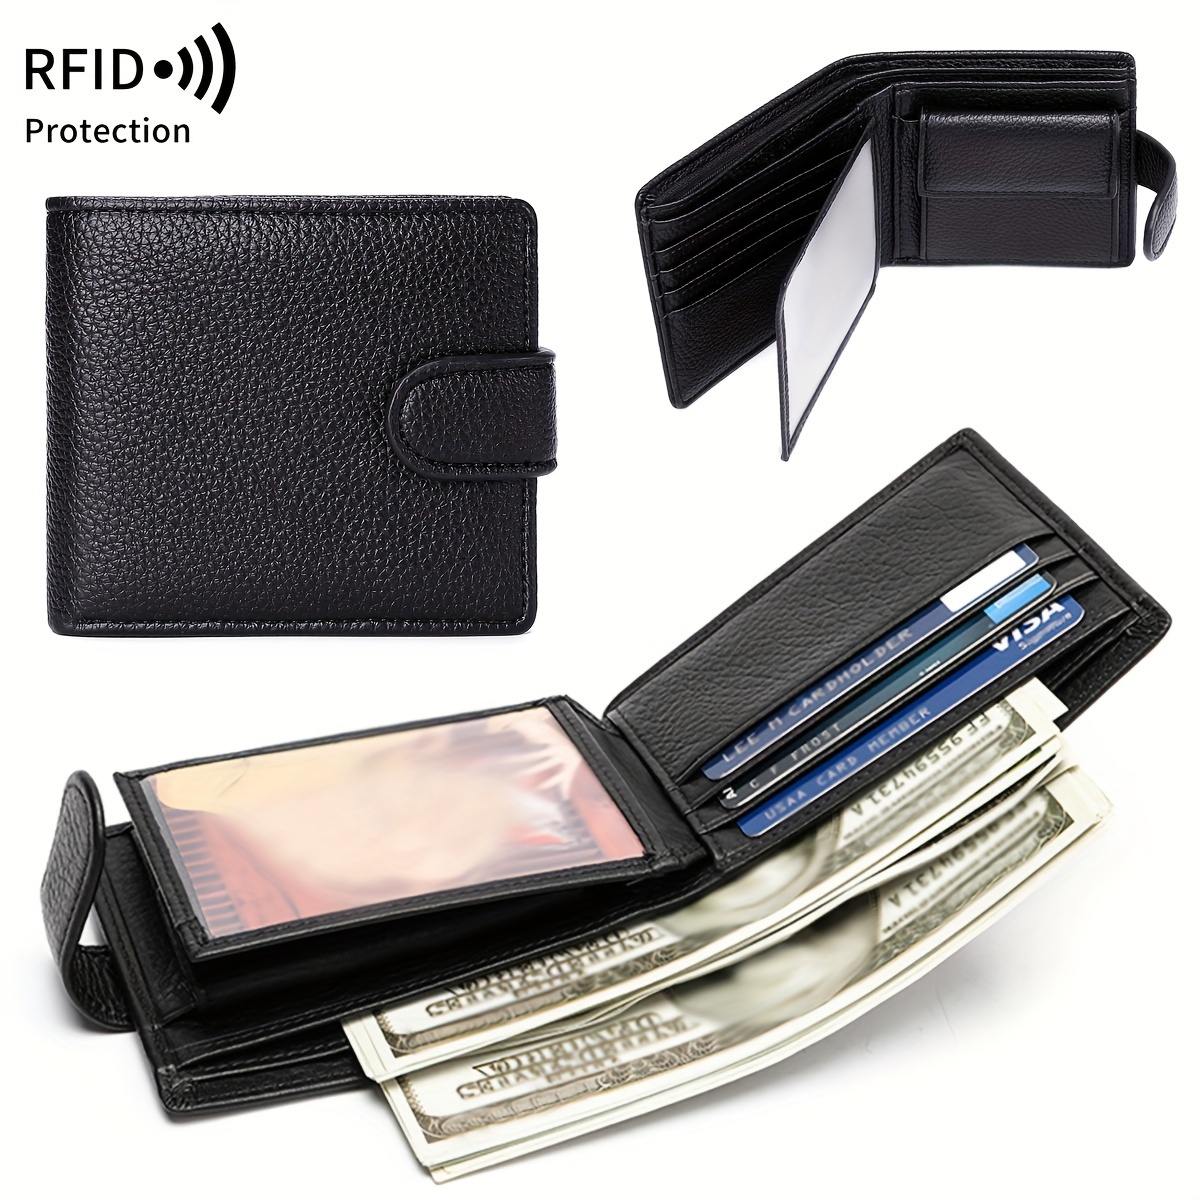 

Forever Miyin Men's Rfid-blocking Wallet - Slim, Vintage Lychee Pattern With Id Window & Extra Capacity, Bifold Design For Credit Cards & Coins, Black Pu Leather